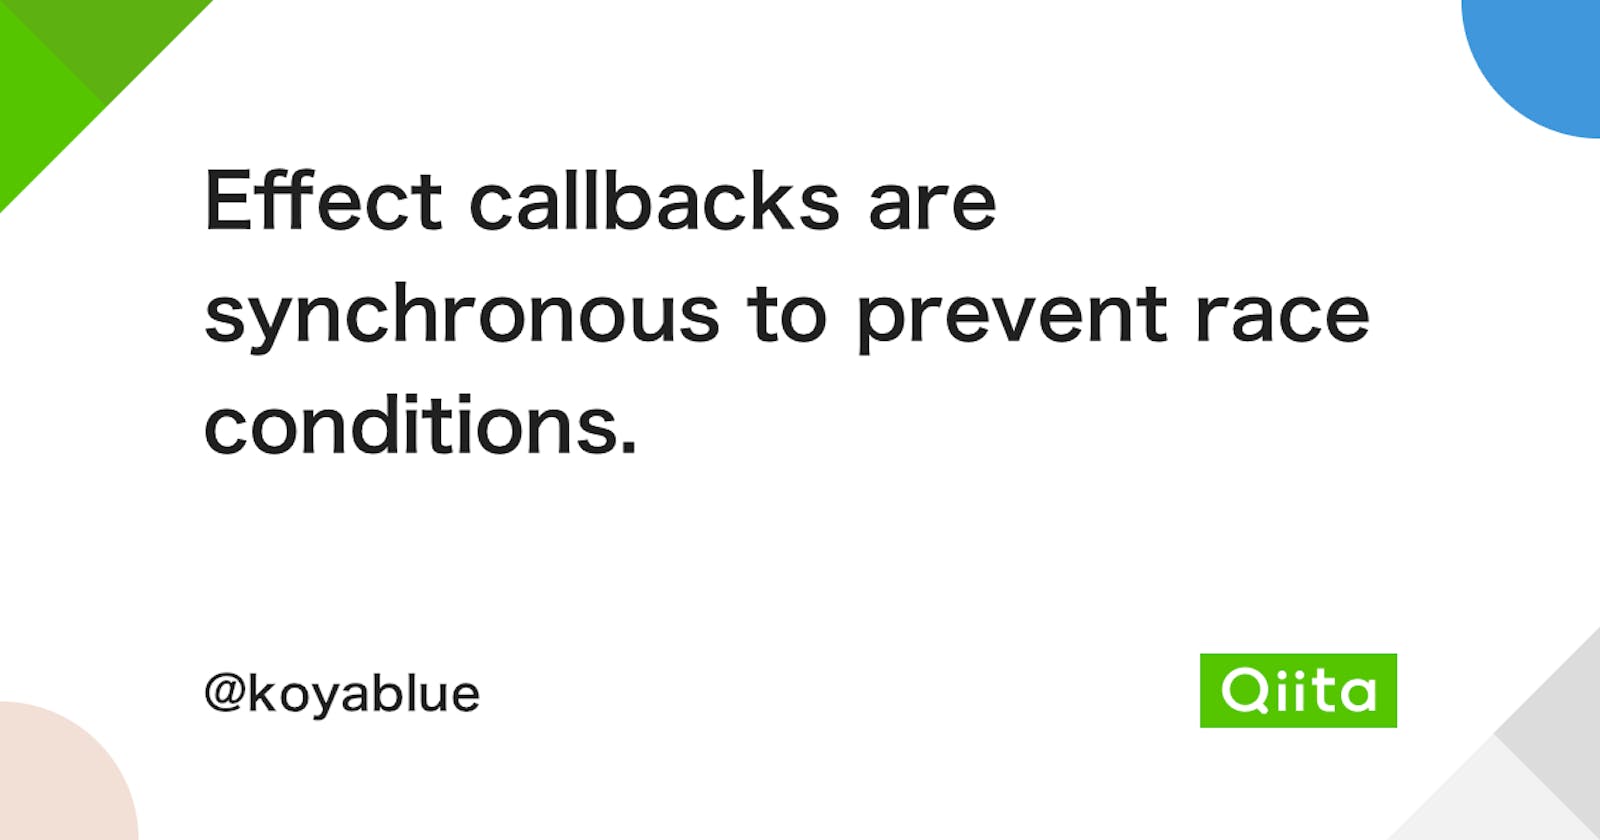 Effects callbacks are synchronous to prevent race conditions